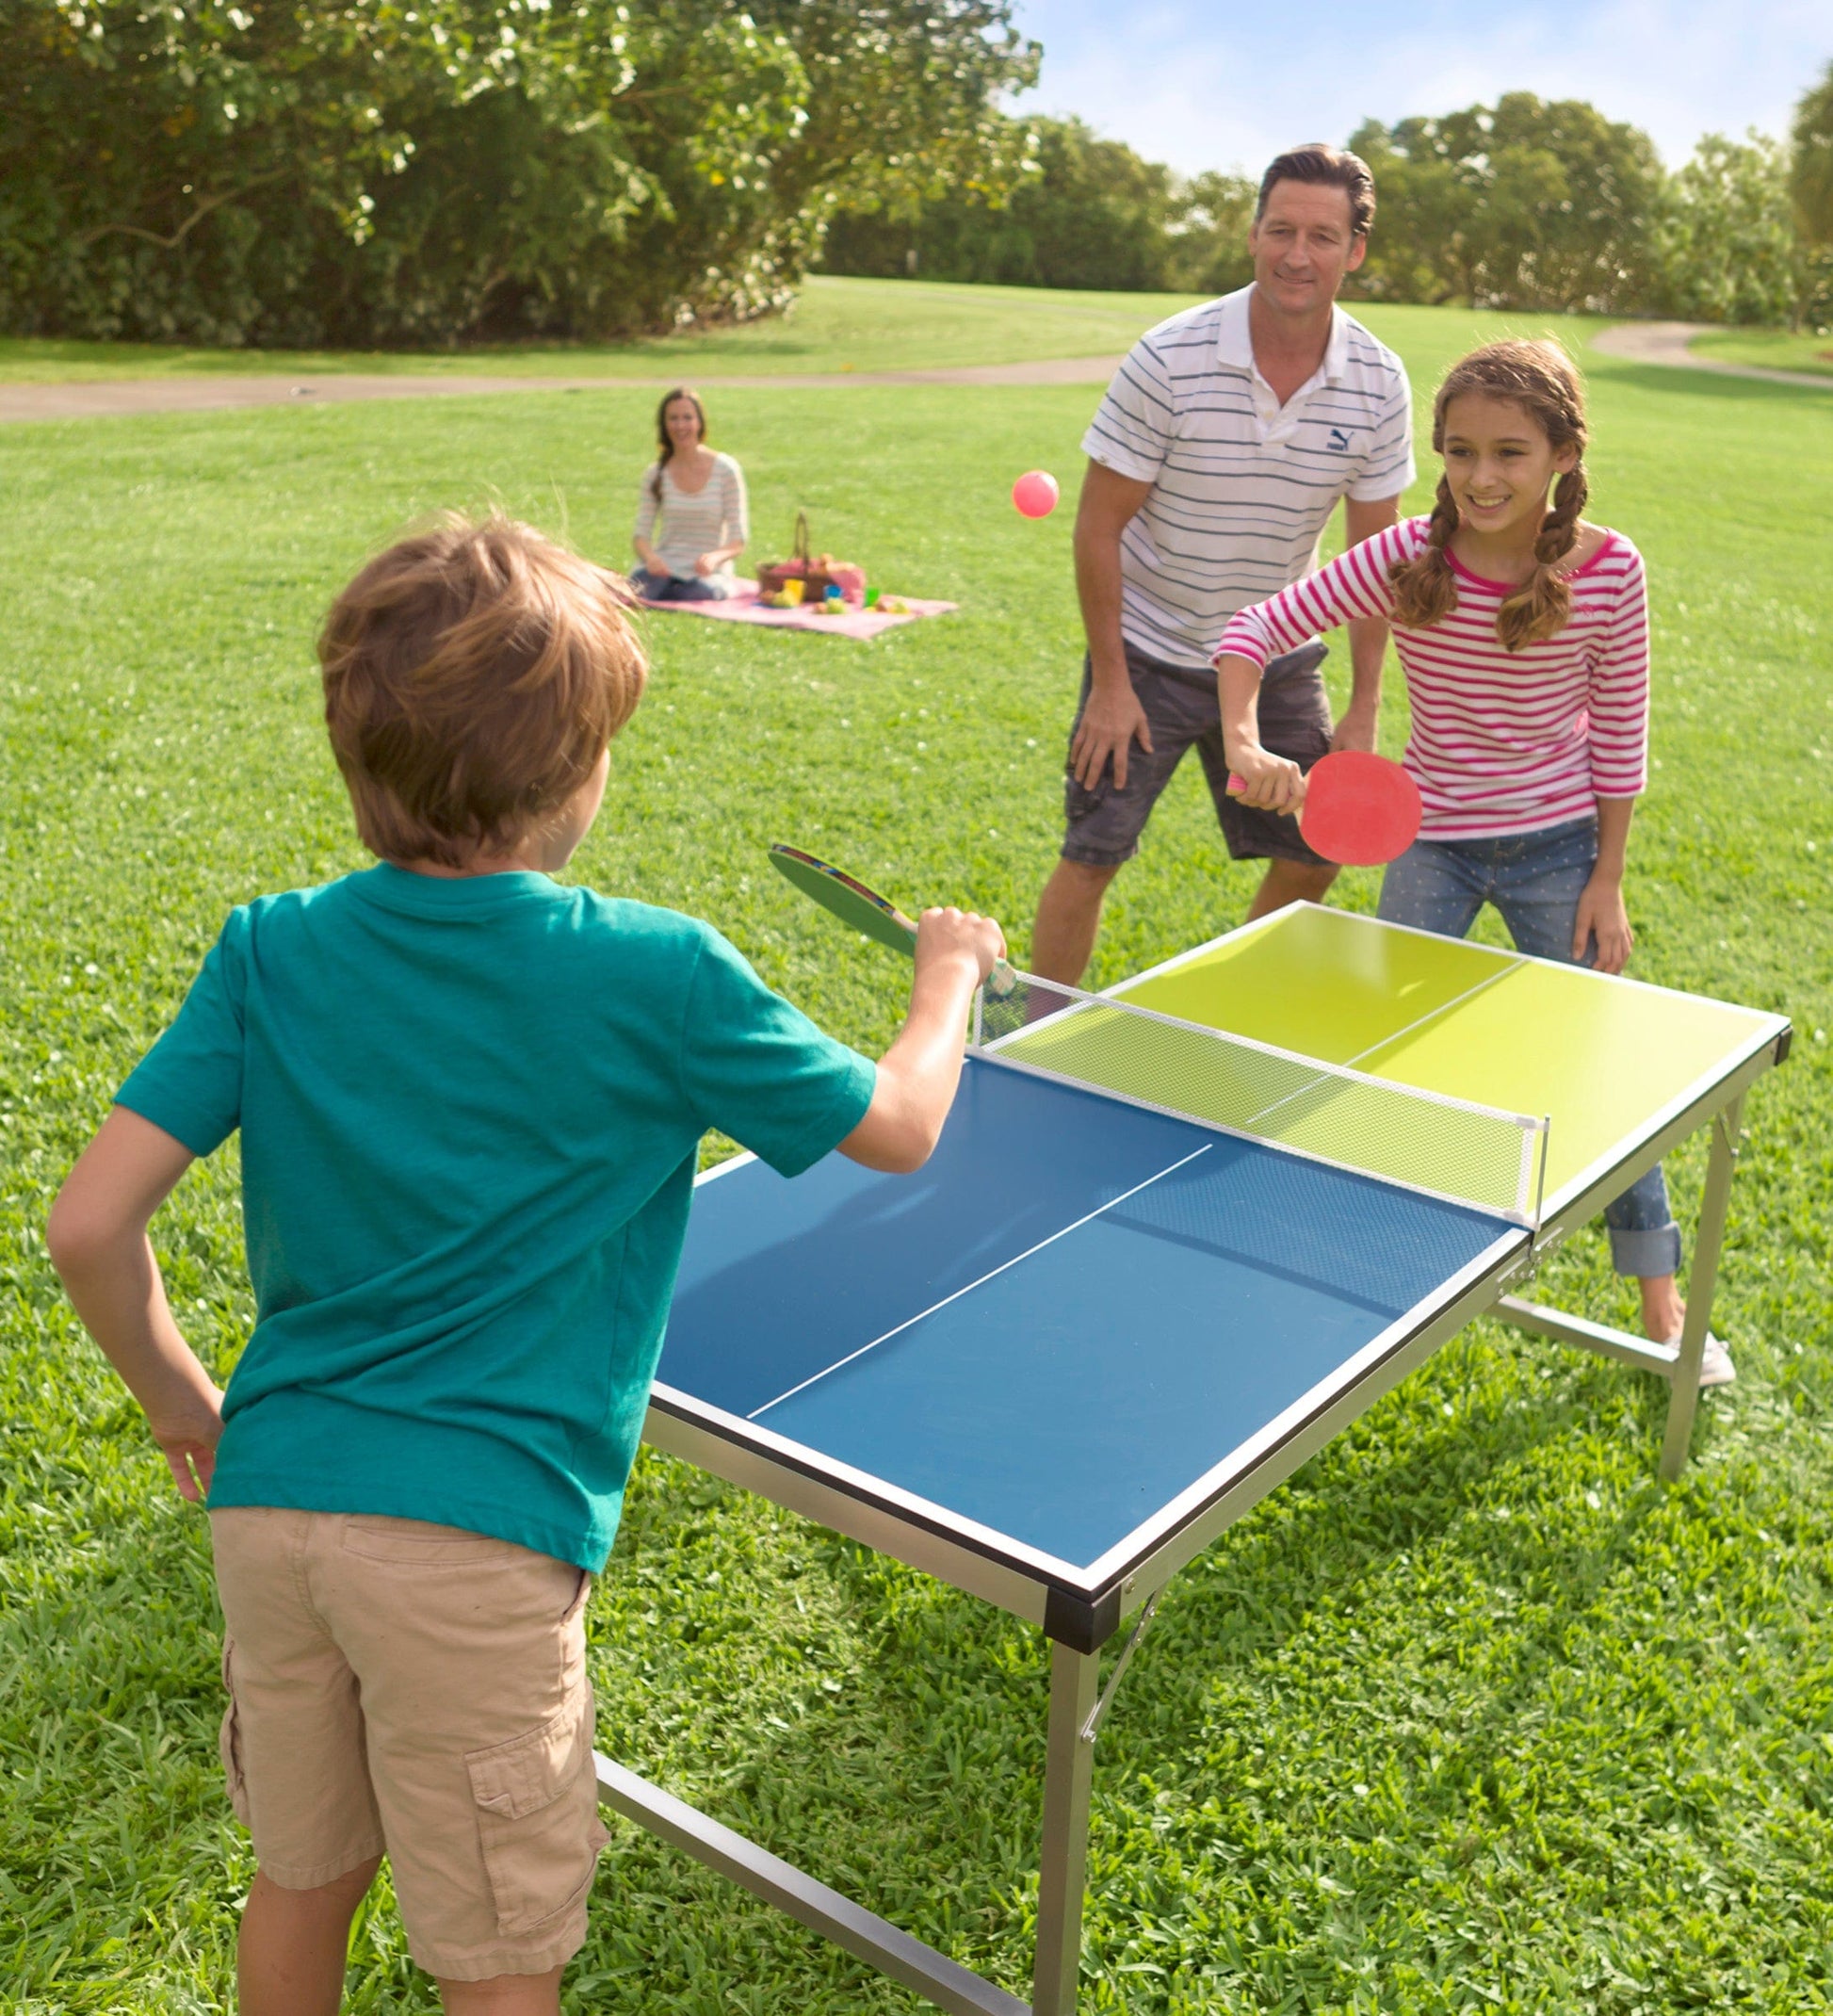 Pick-Up-and-Go Portable Table Tennis